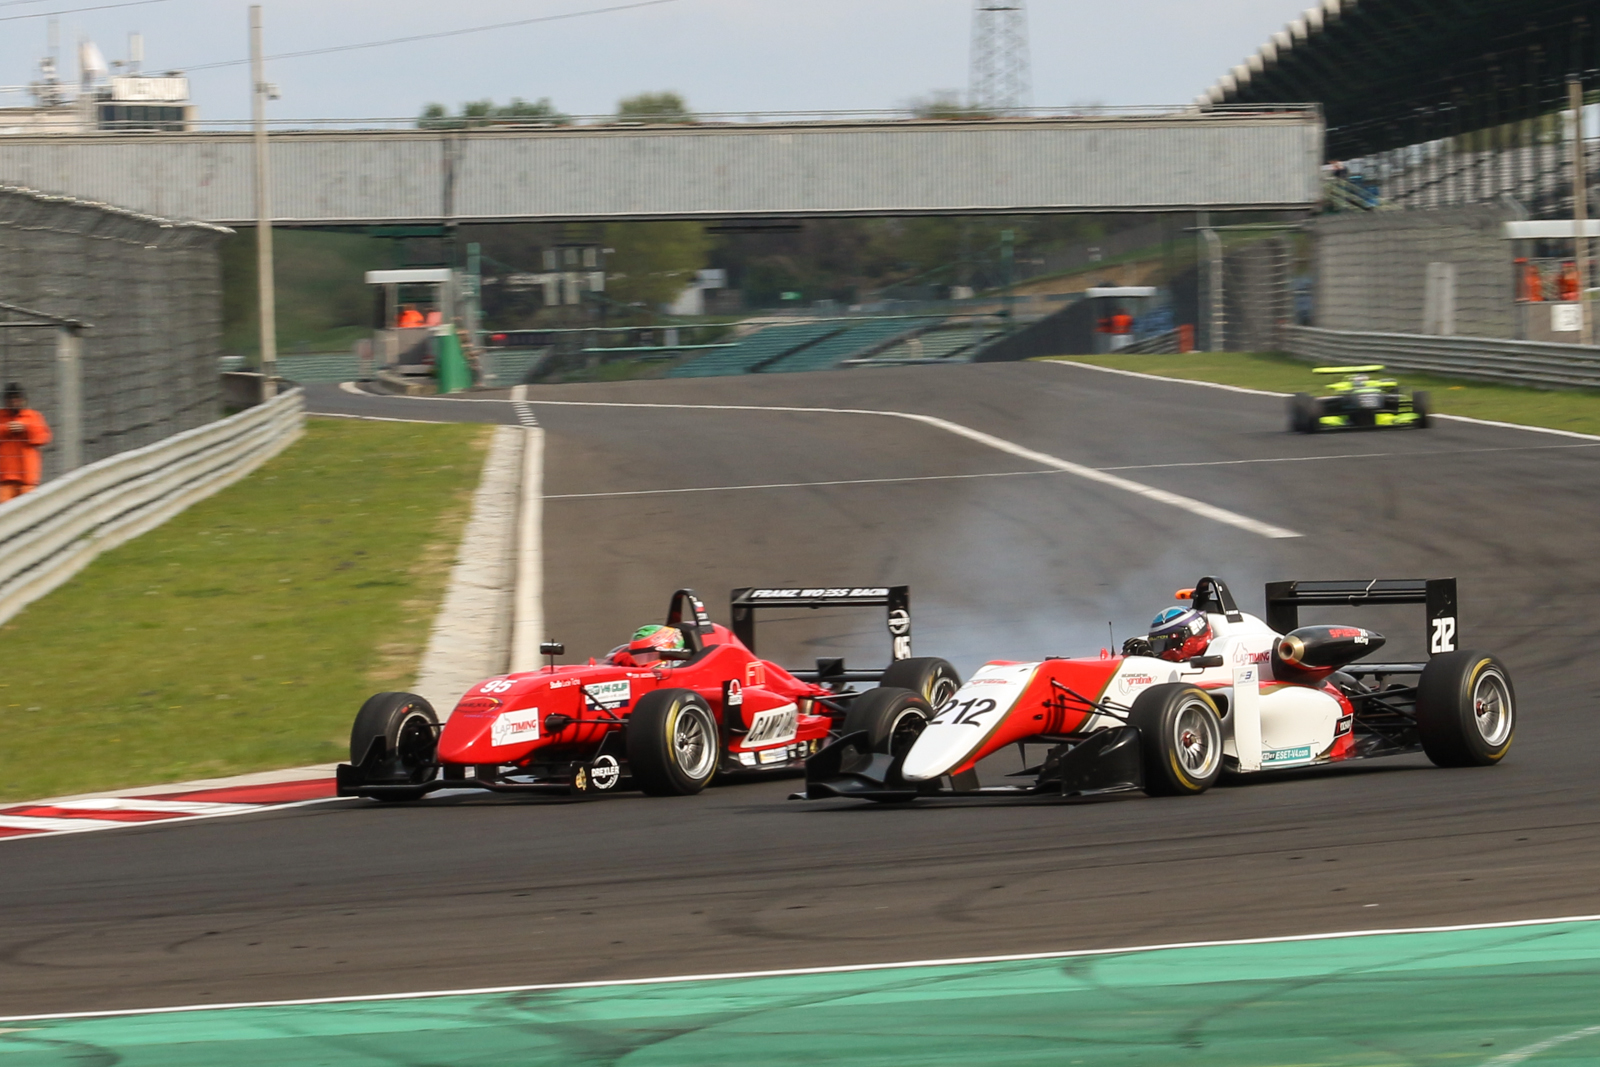 Paolo Brajnik did not crack under pressure and won the Formula race